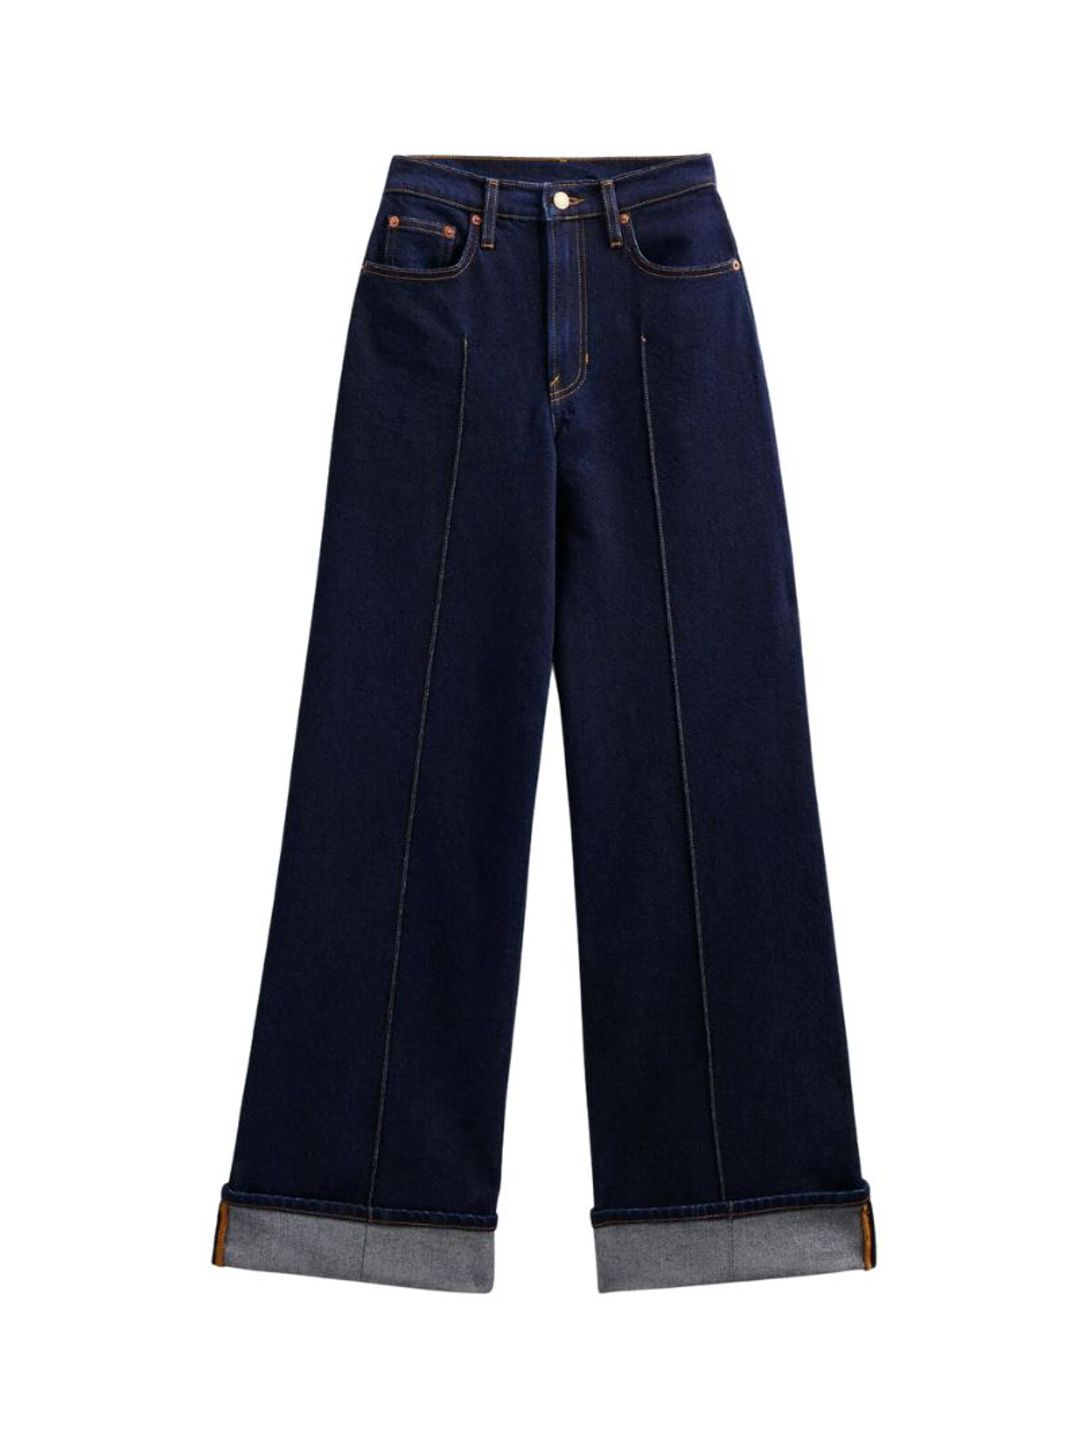 Turn-up Jeans - Boden 